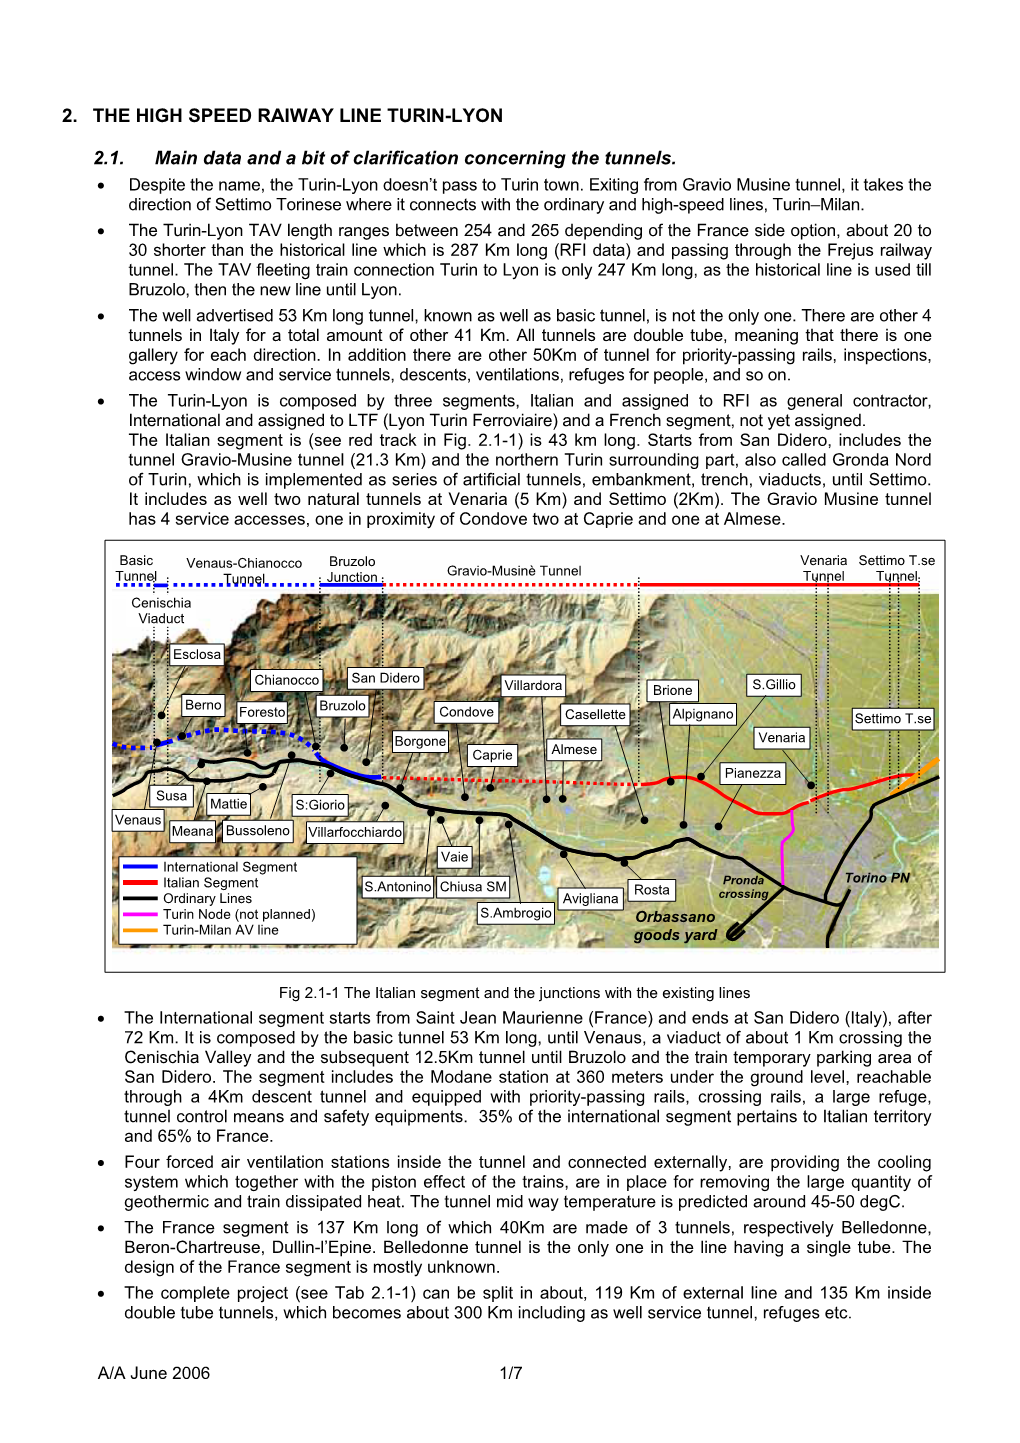 2. the HIGH SPEED RAIWAY LINE TURIN-LYON 2.1. Main Data and a Bit of Clarification Concerning the Tunnels